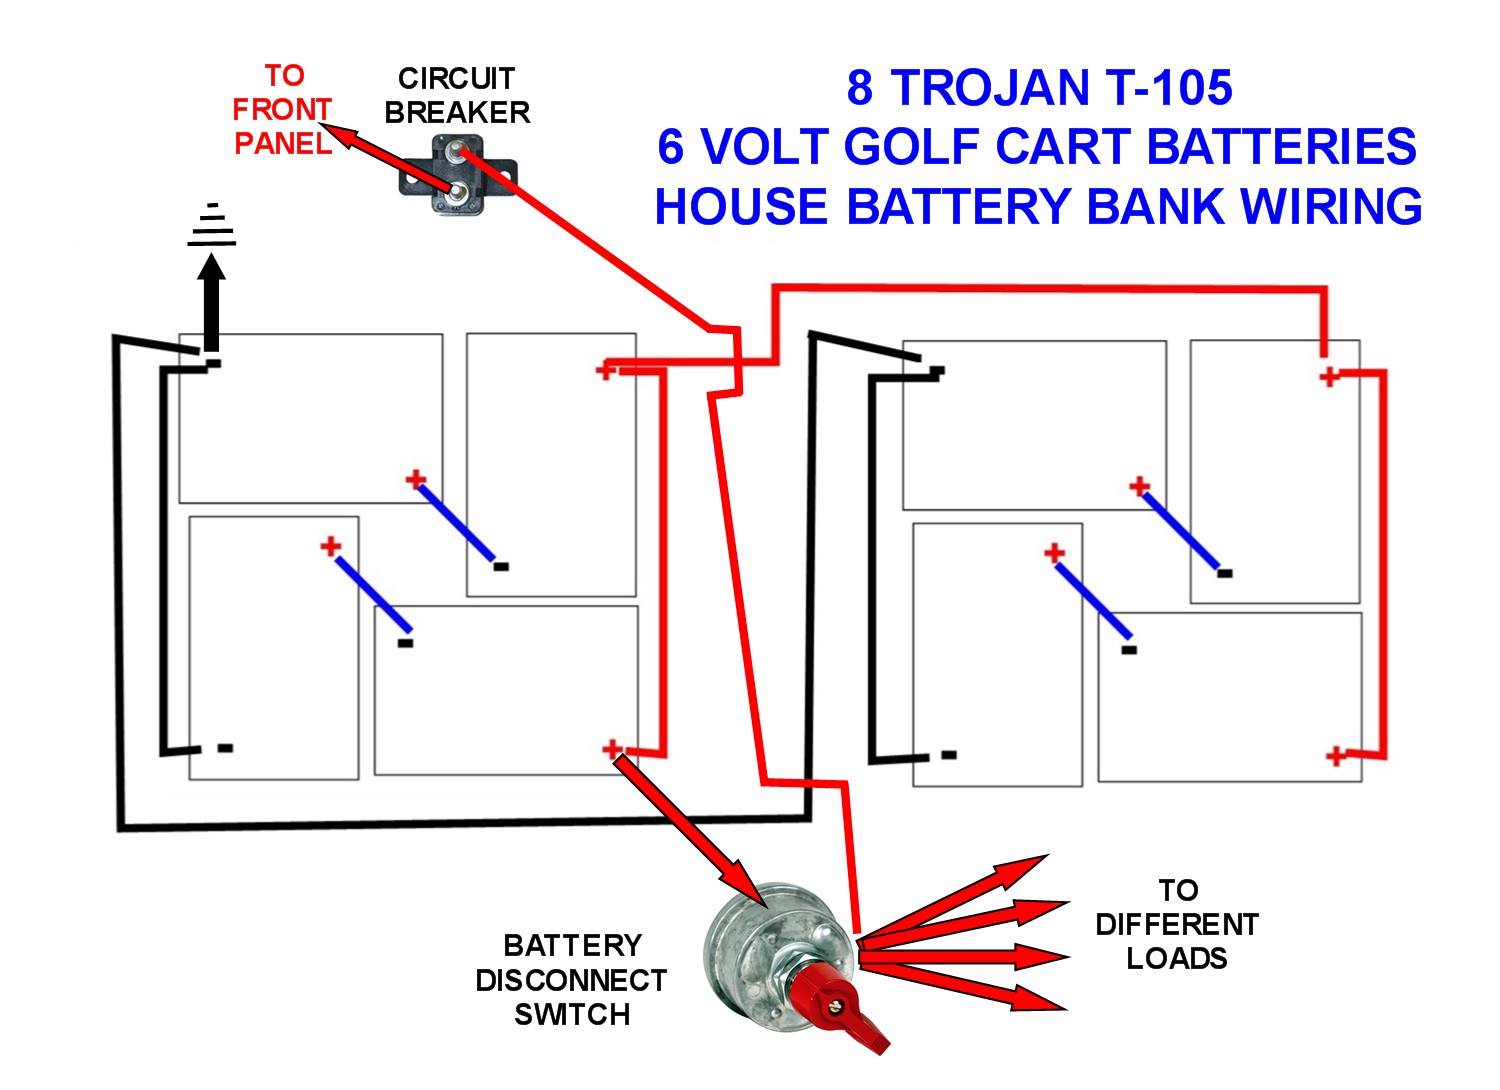 THIS IS HOW MY EIGHT TROJAN T-105, 6 VOLT HOUSE BATTERIES ARE WIRED